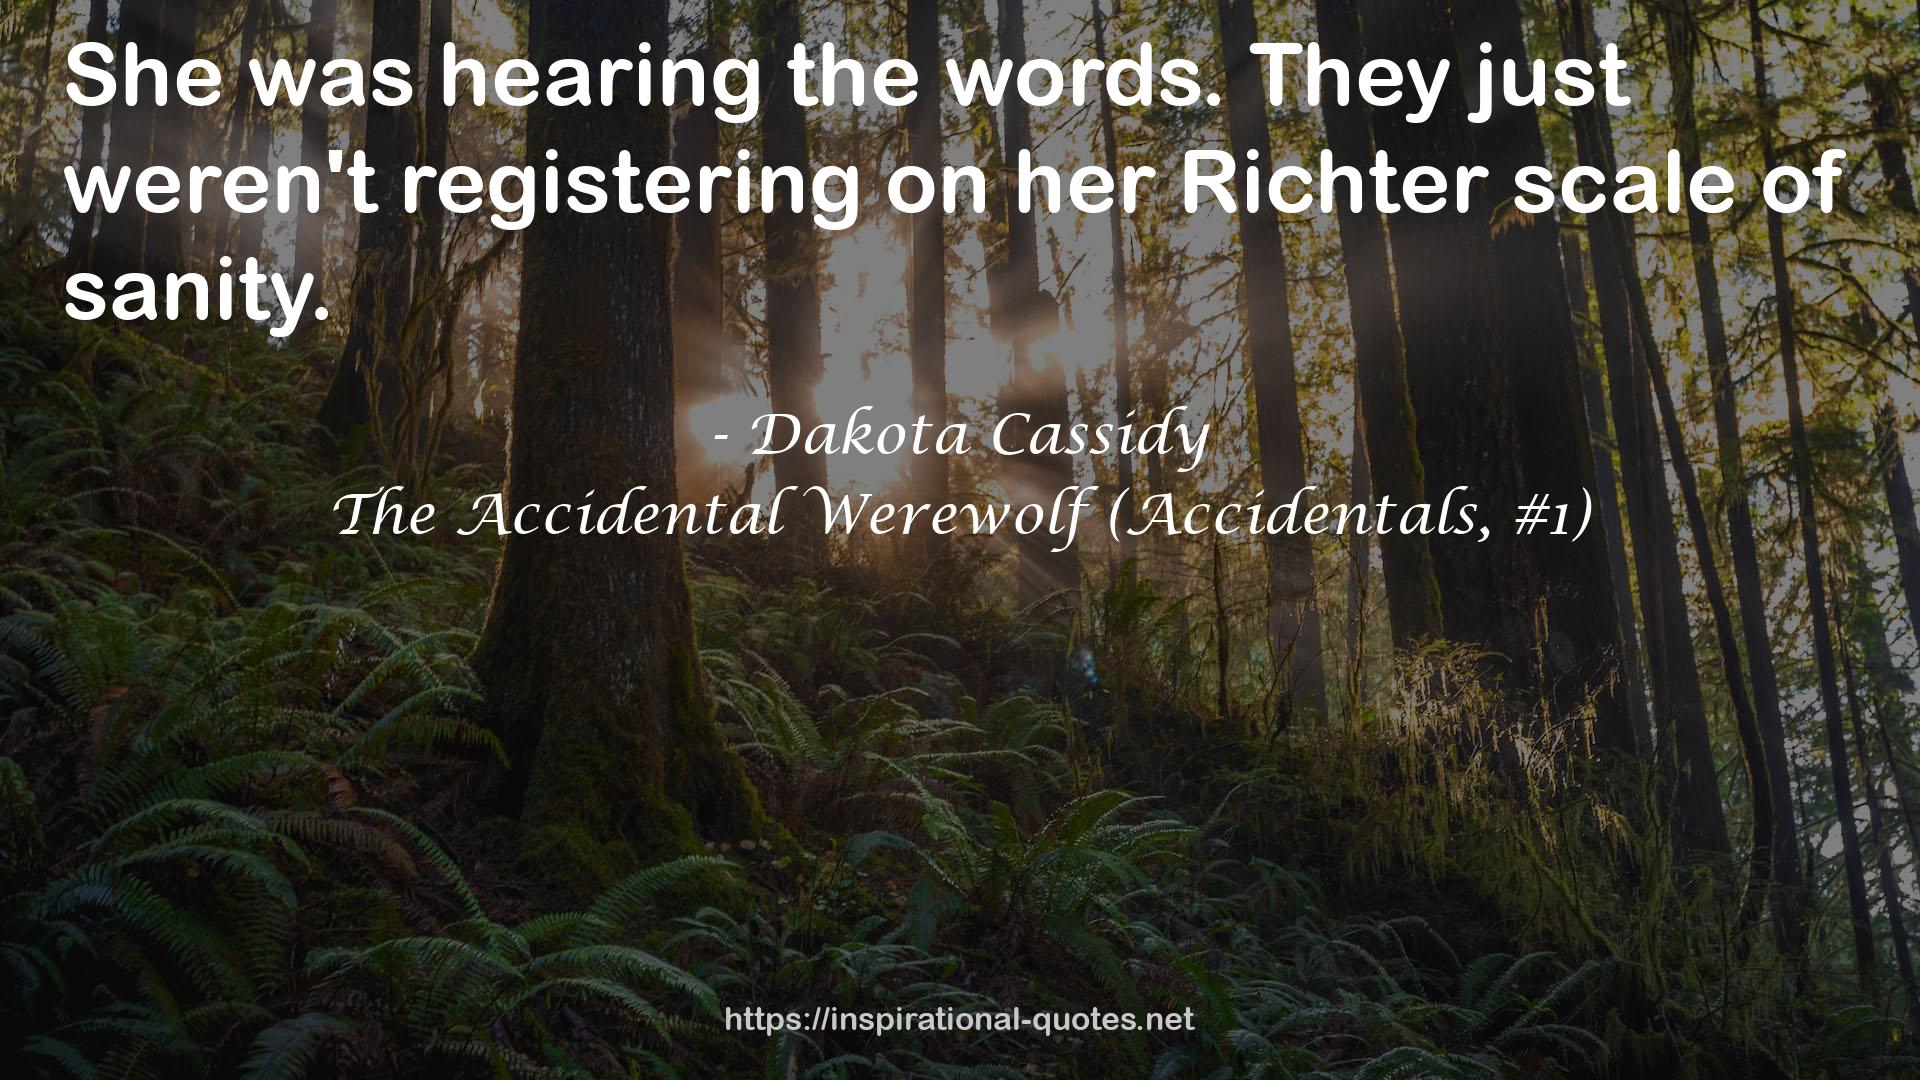 The Accidental Werewolf (Accidentals, #1) QUOTES